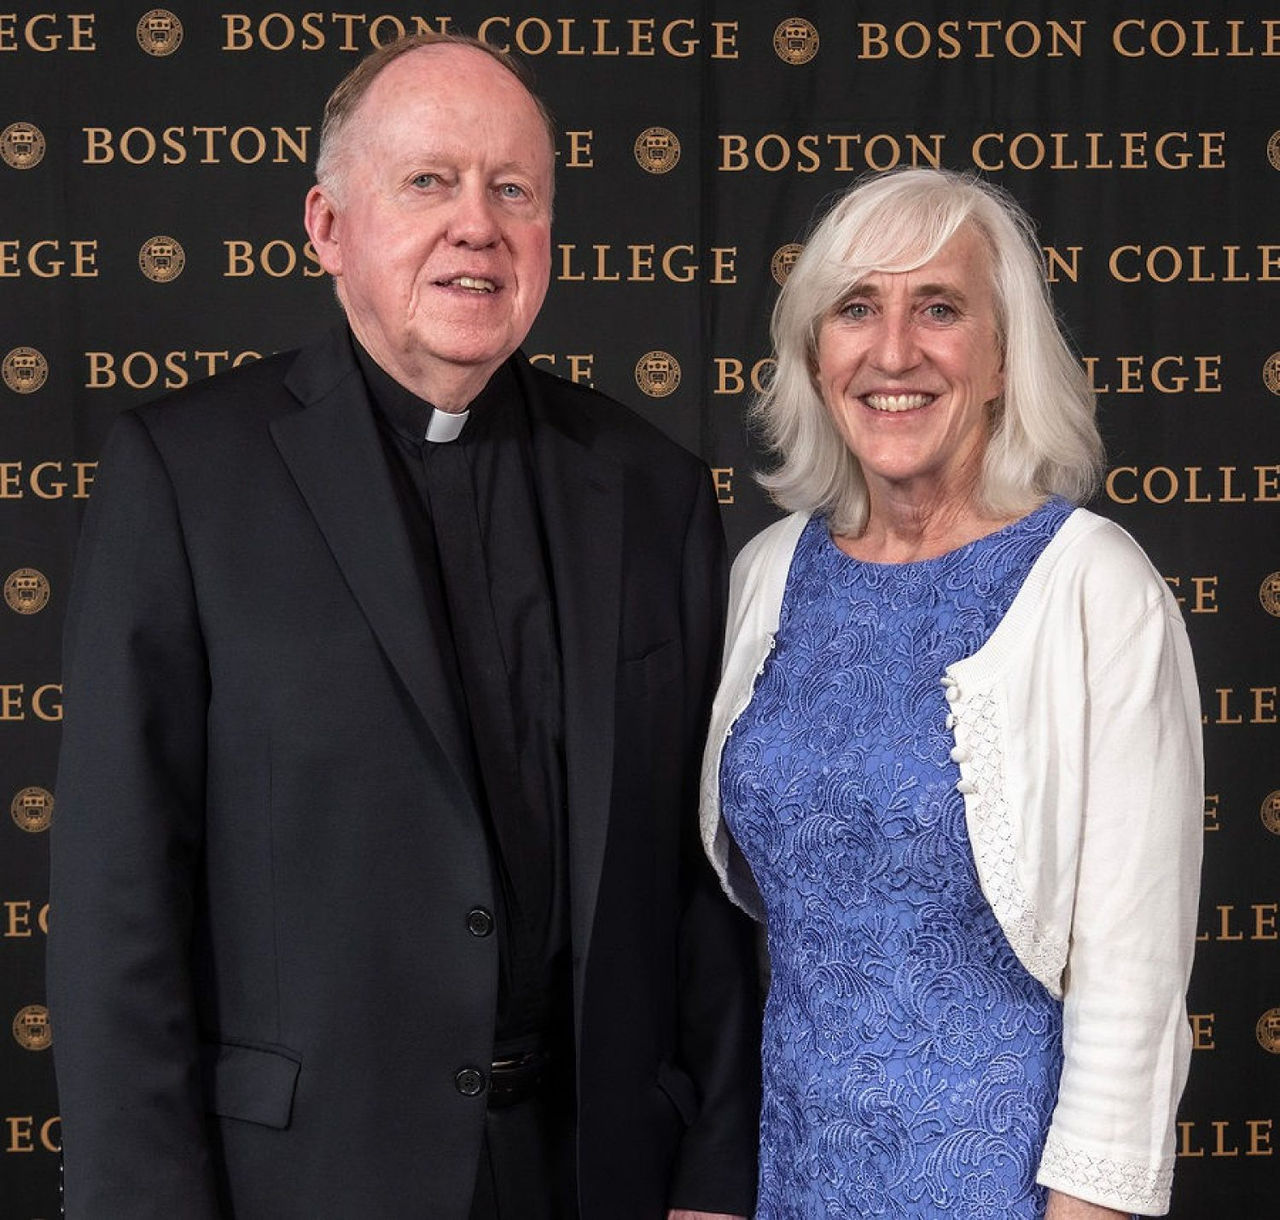 Colleen Simonelli with Fr. Leahy